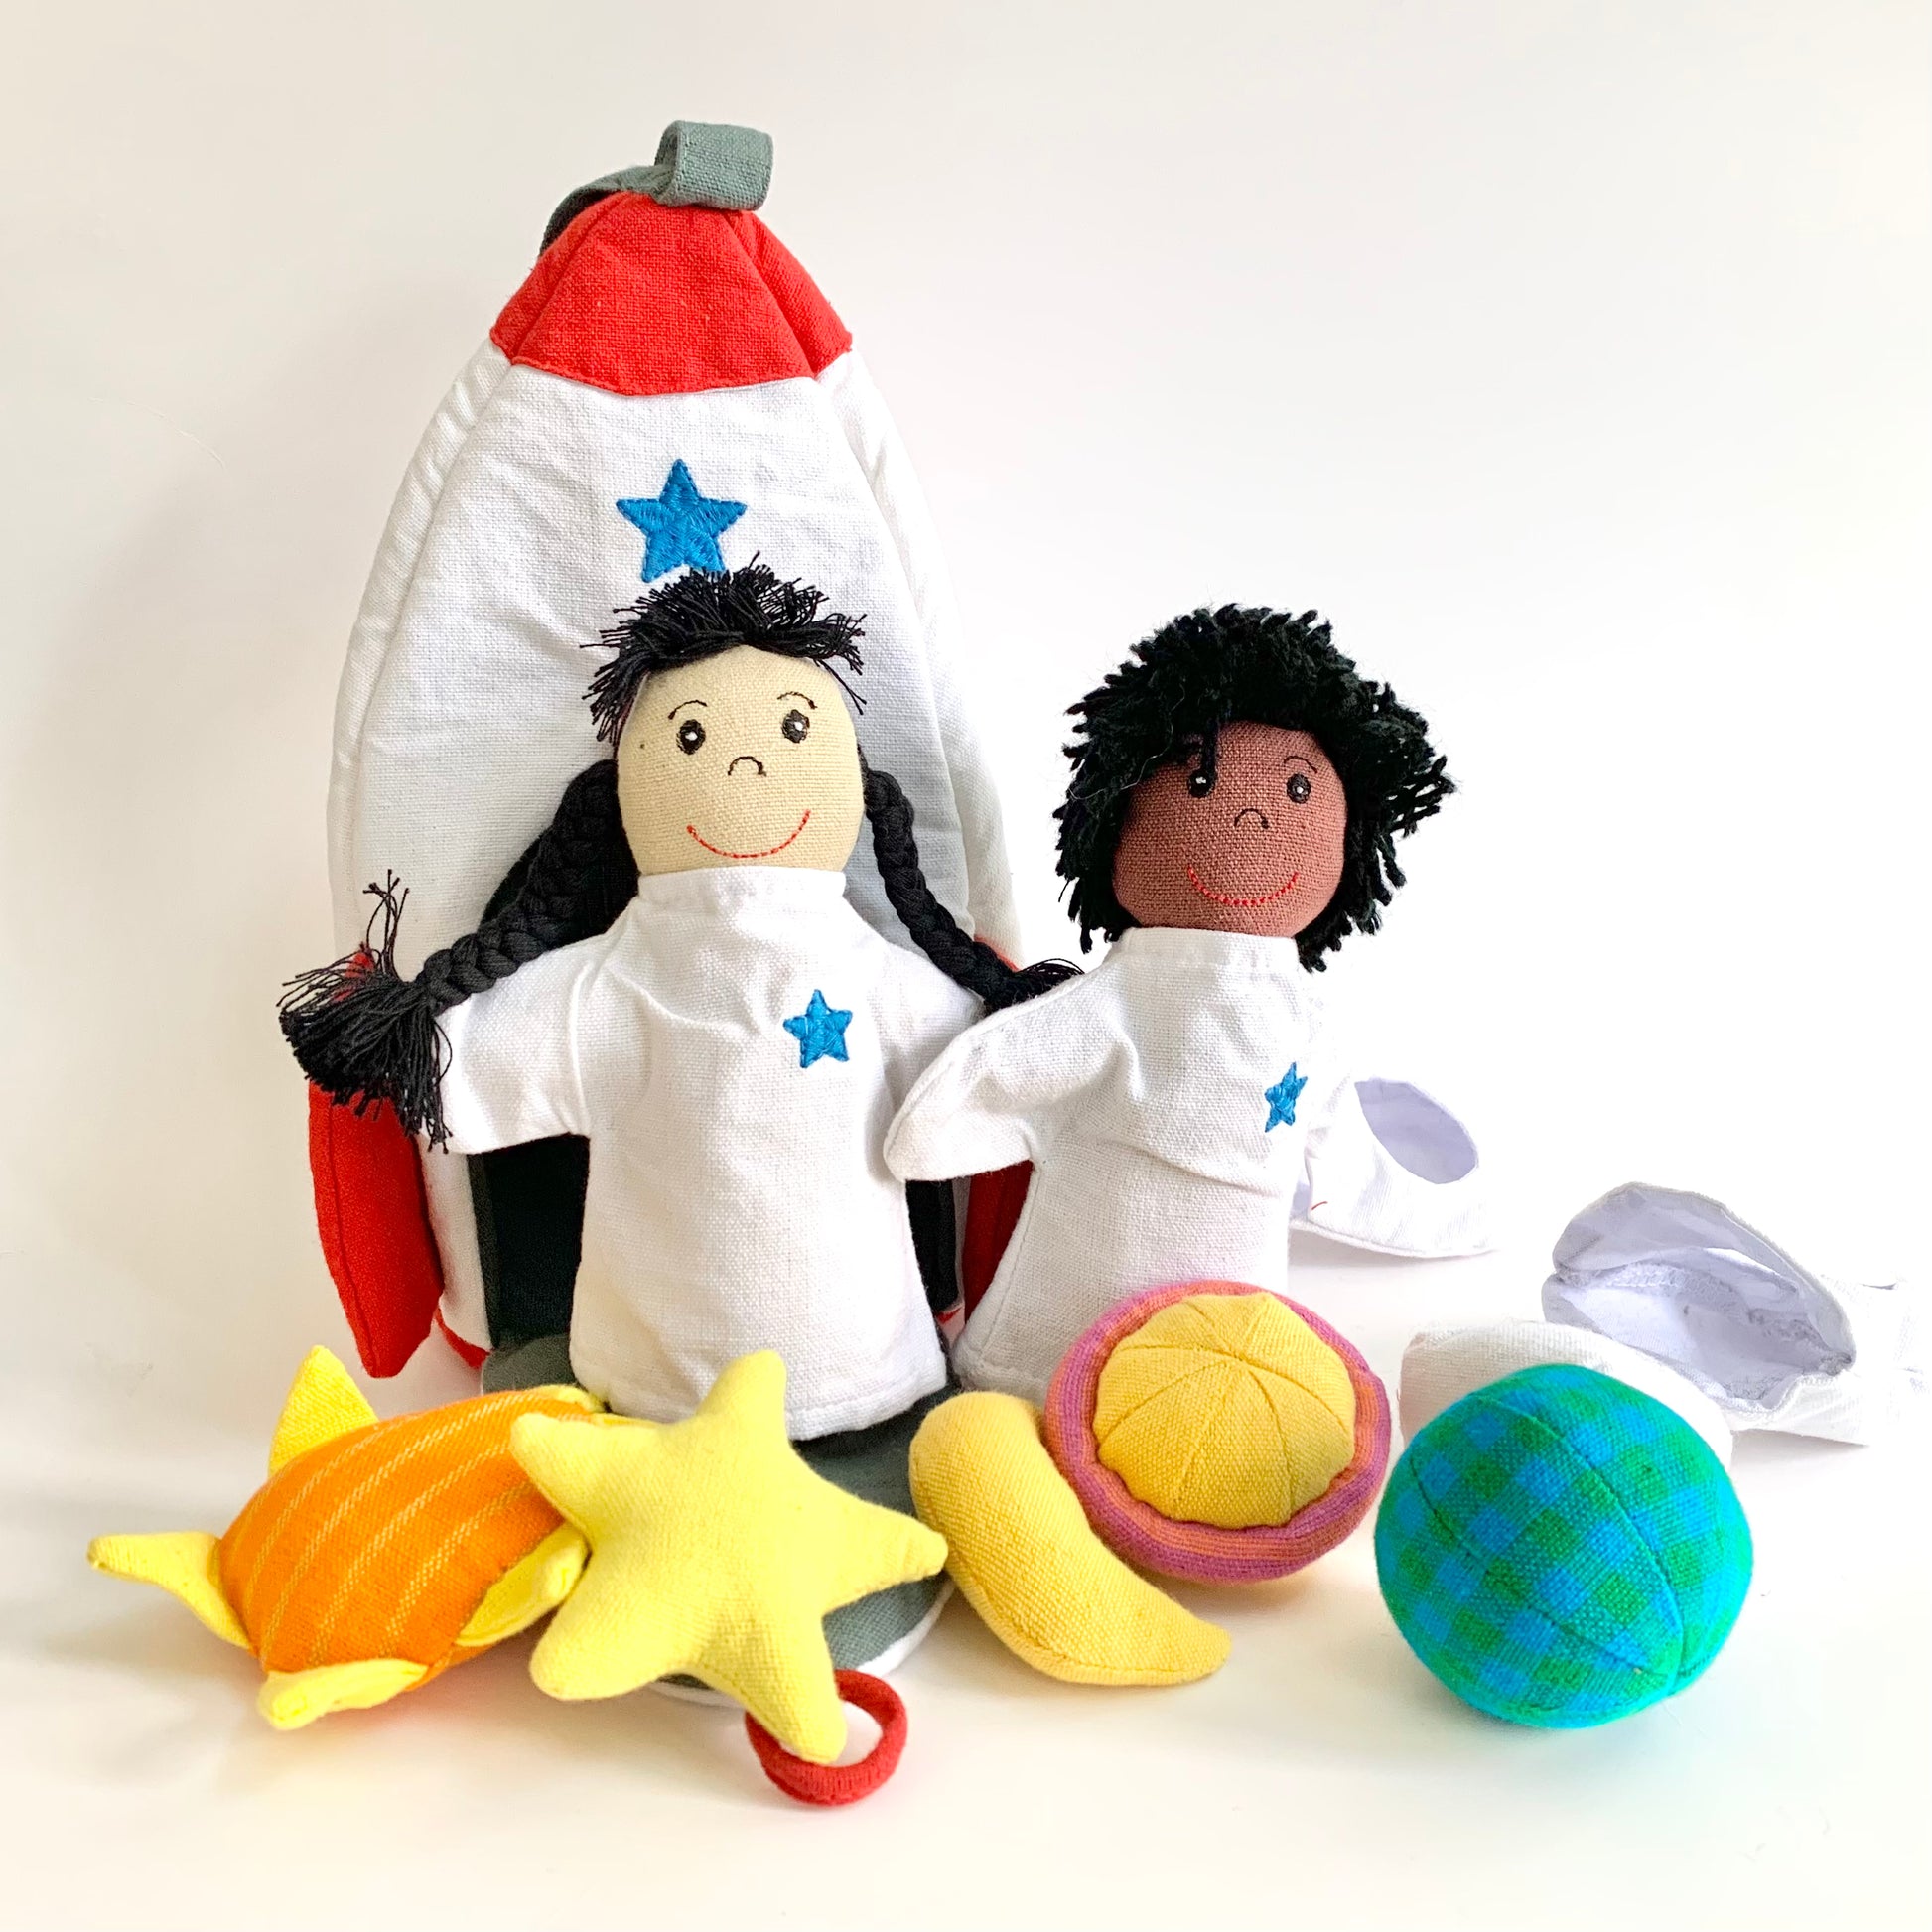 Rocket ship and astronaut toys